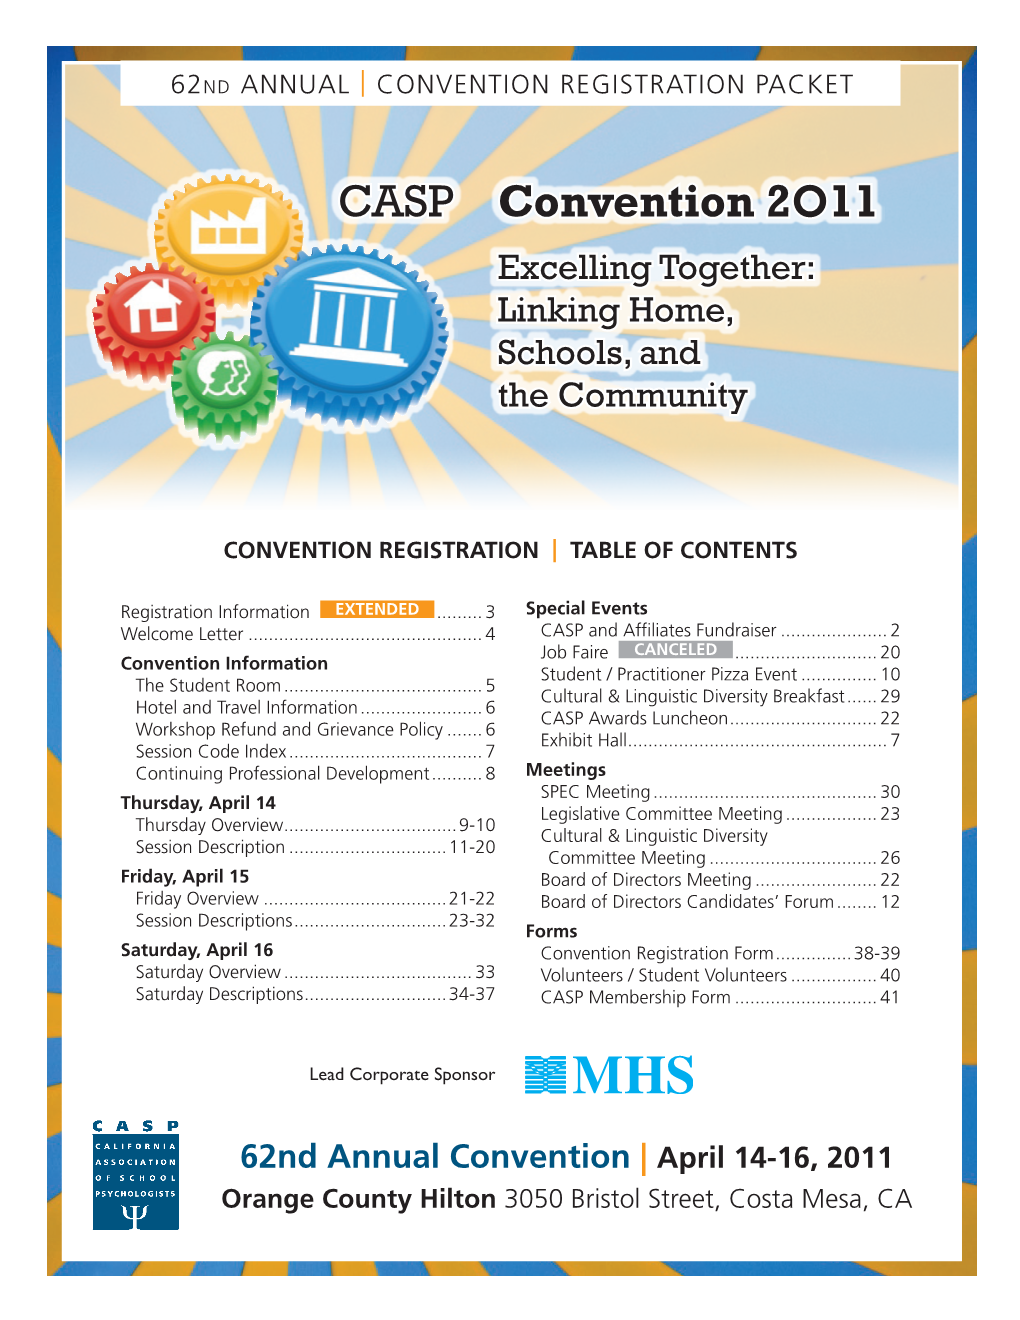 CASP Convention 2O11 Excelling Together: Linking Home, Schools, and the Community